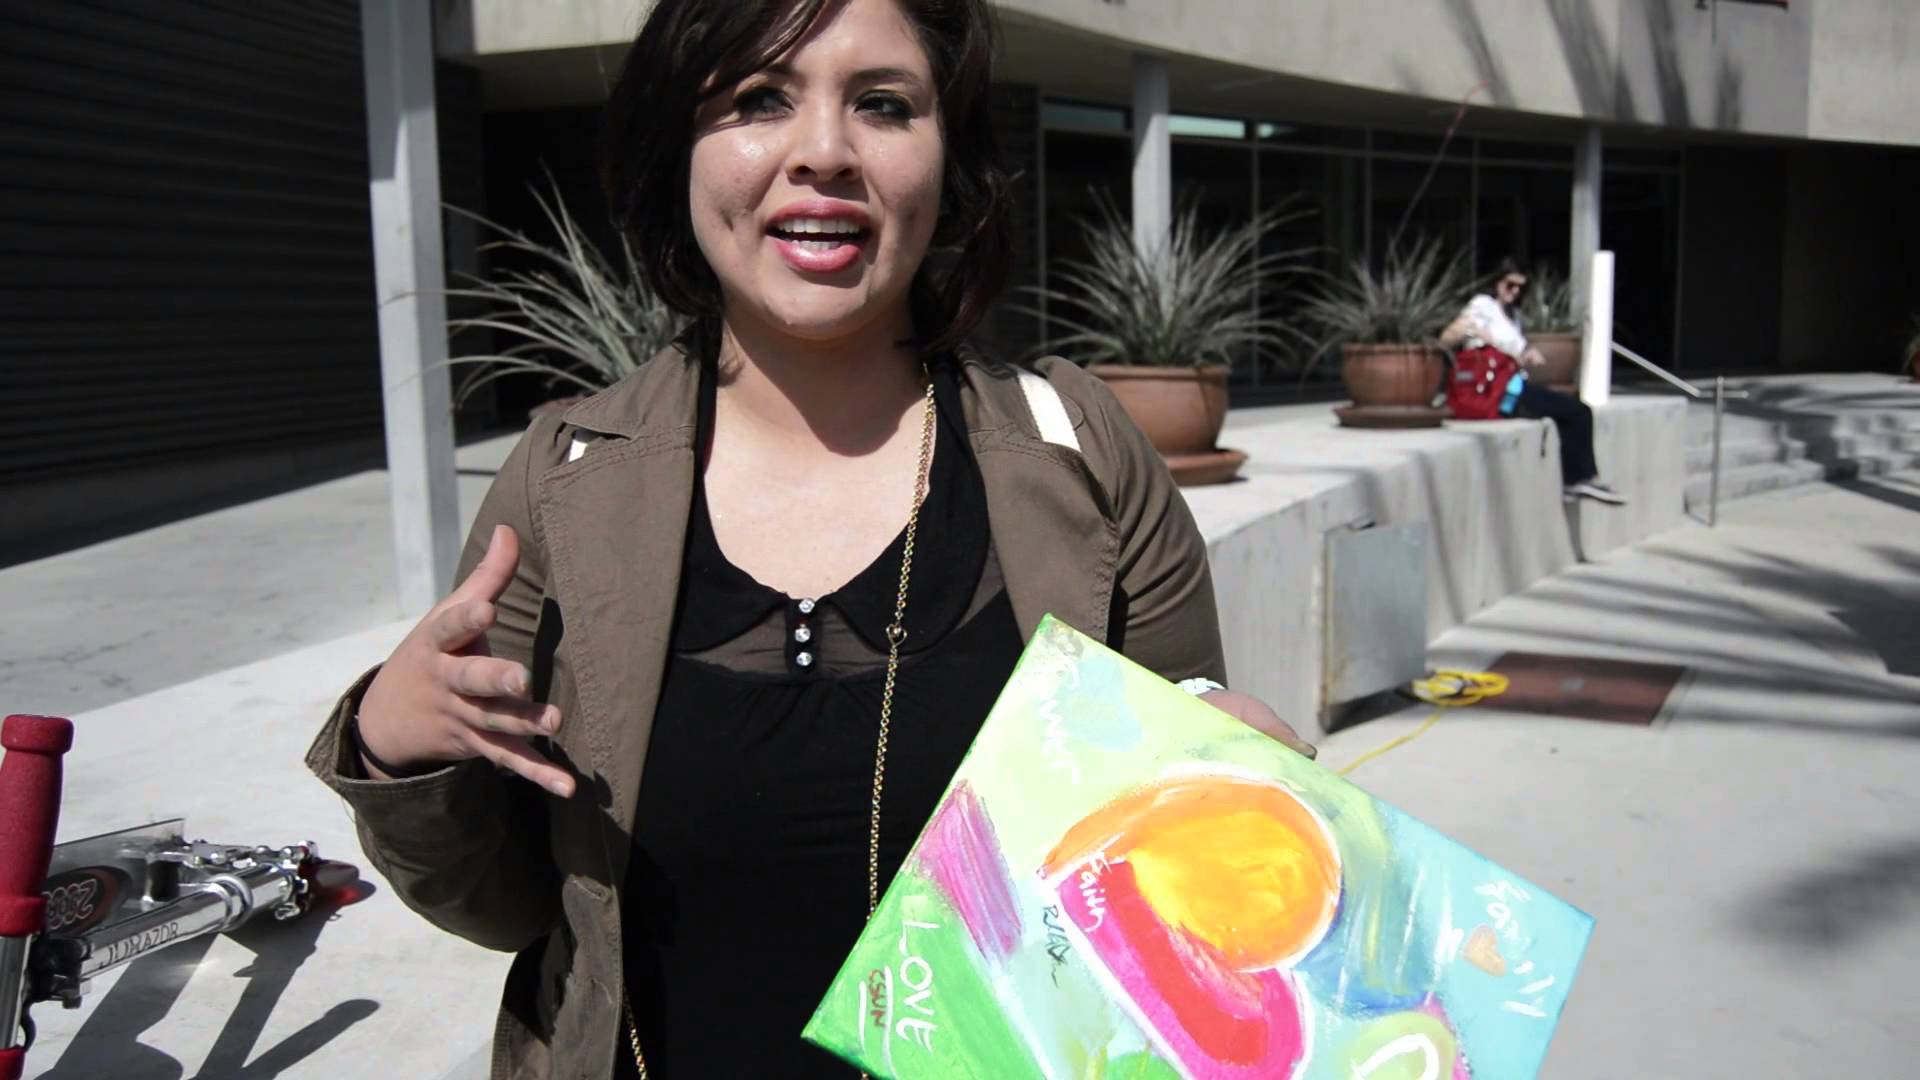 Watch: Colorful All That Art at CSUN